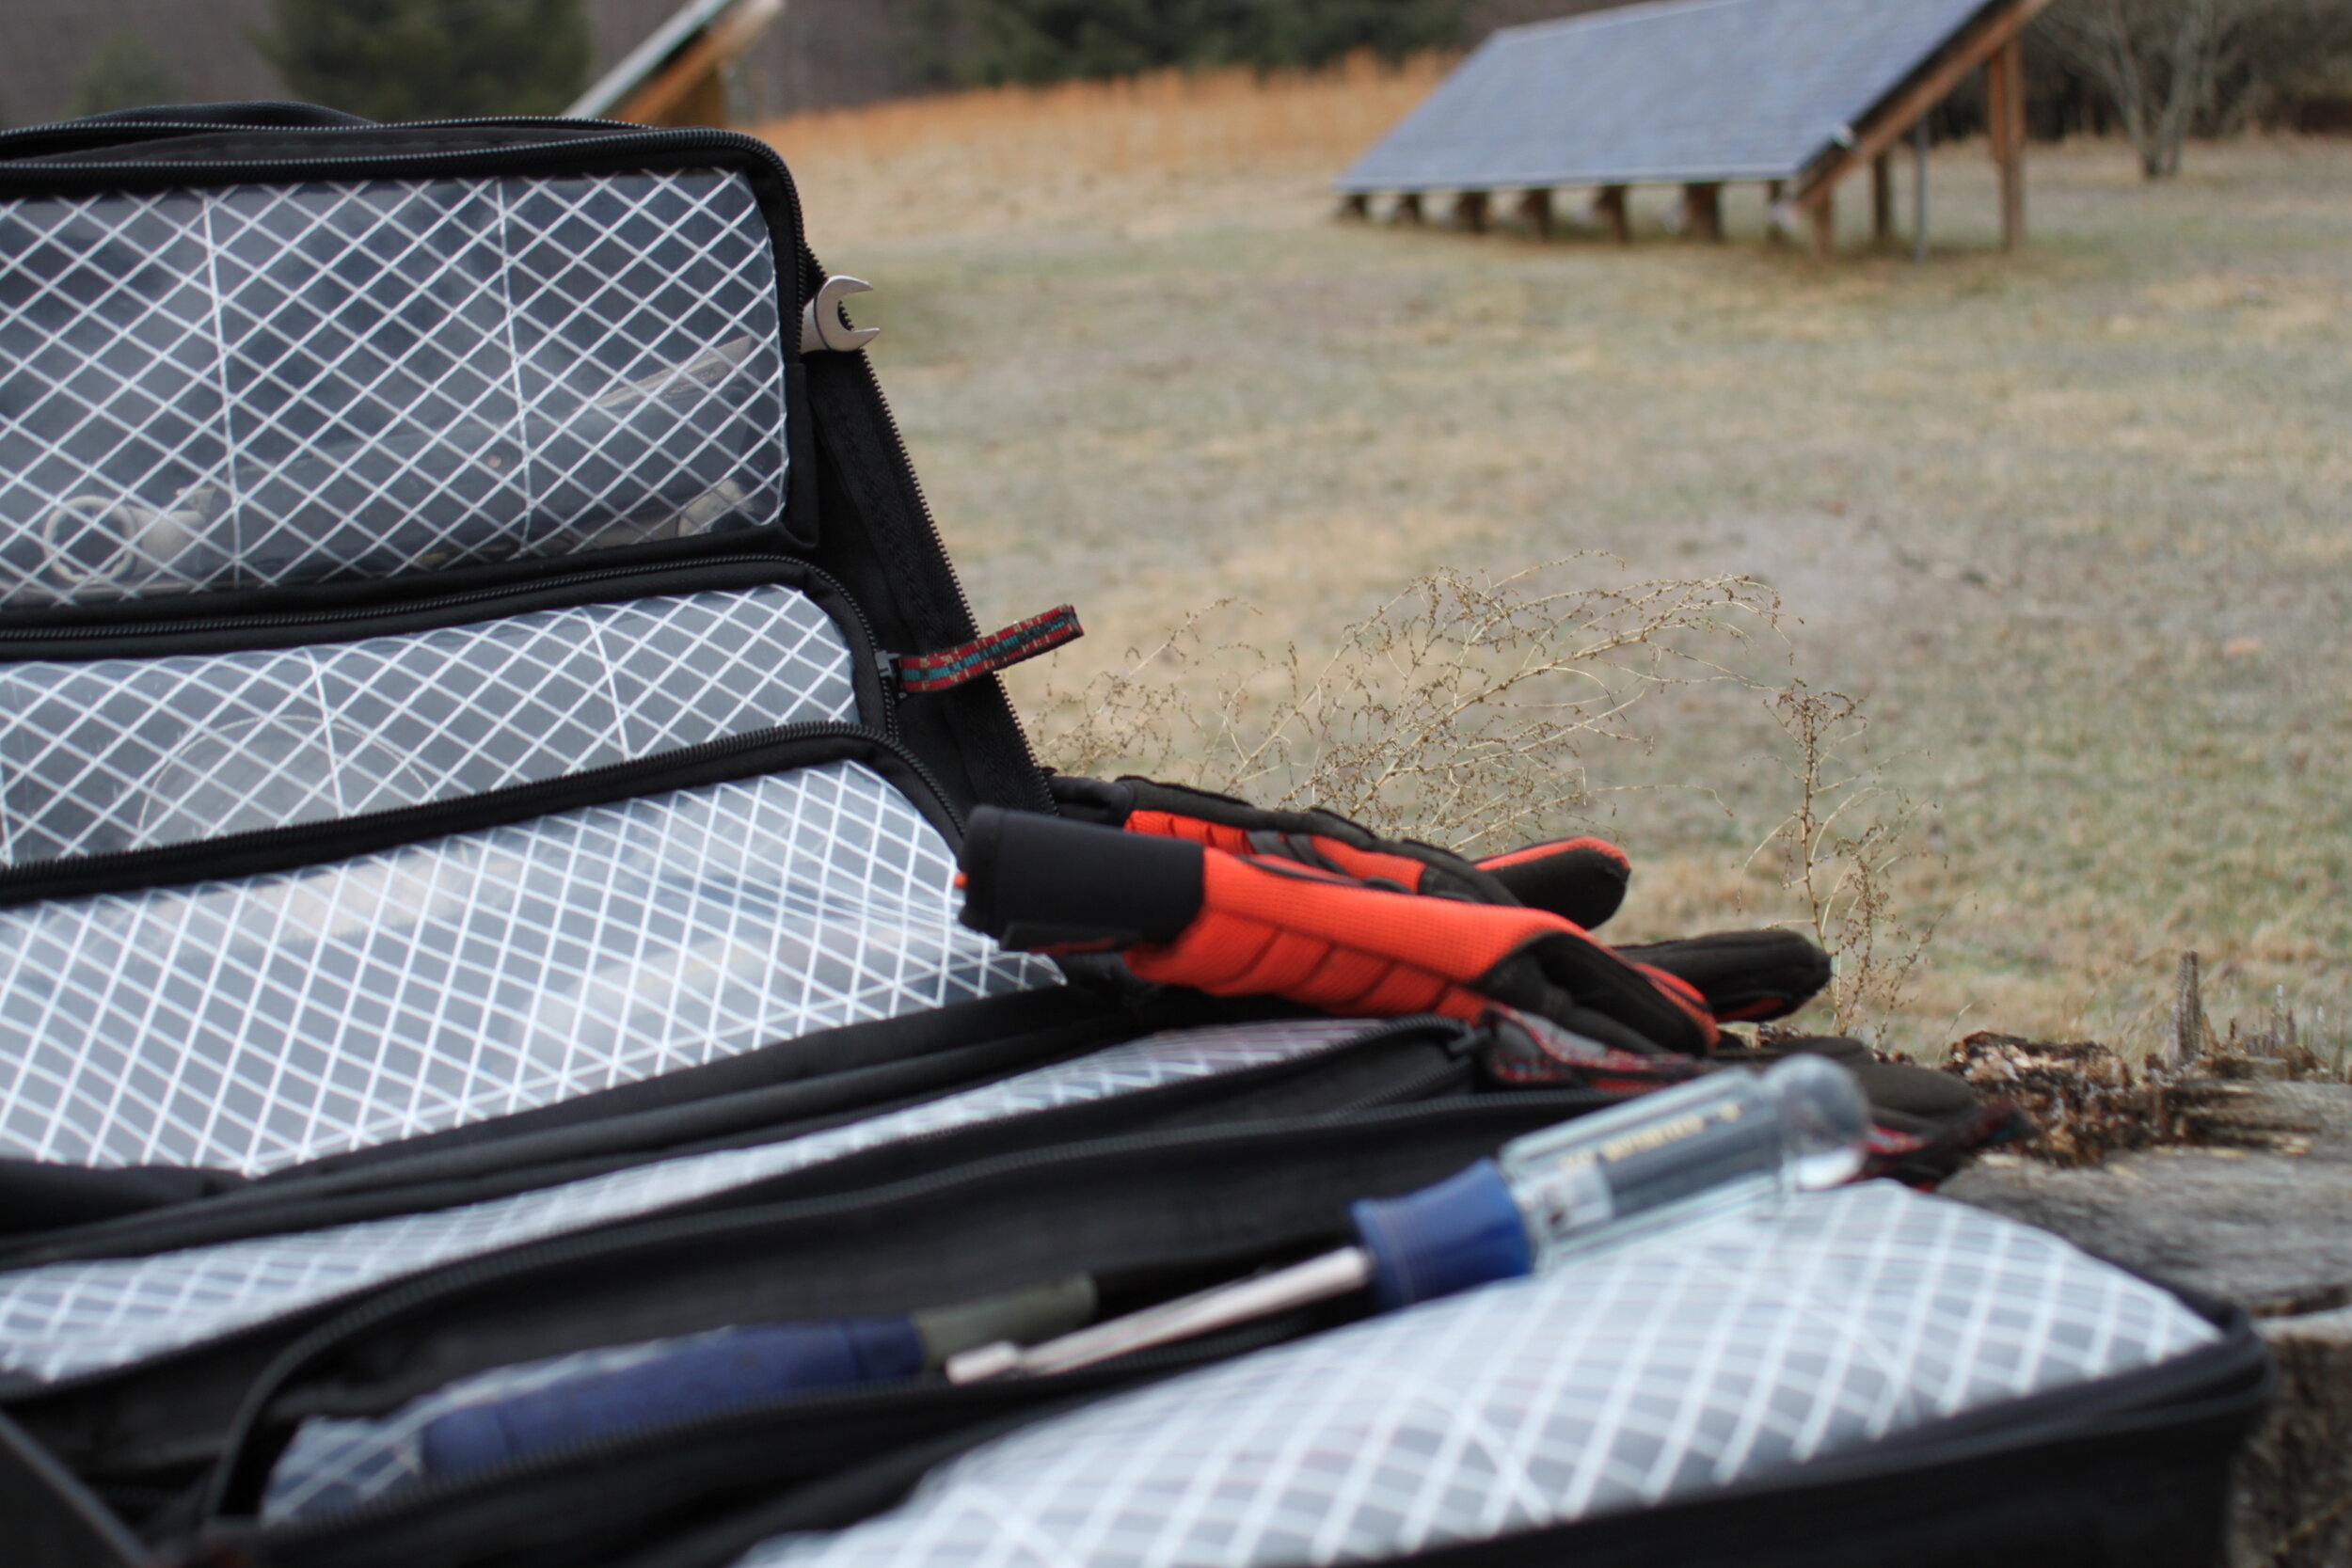 a review: the brog tool bag - @broverland #off-road #storage